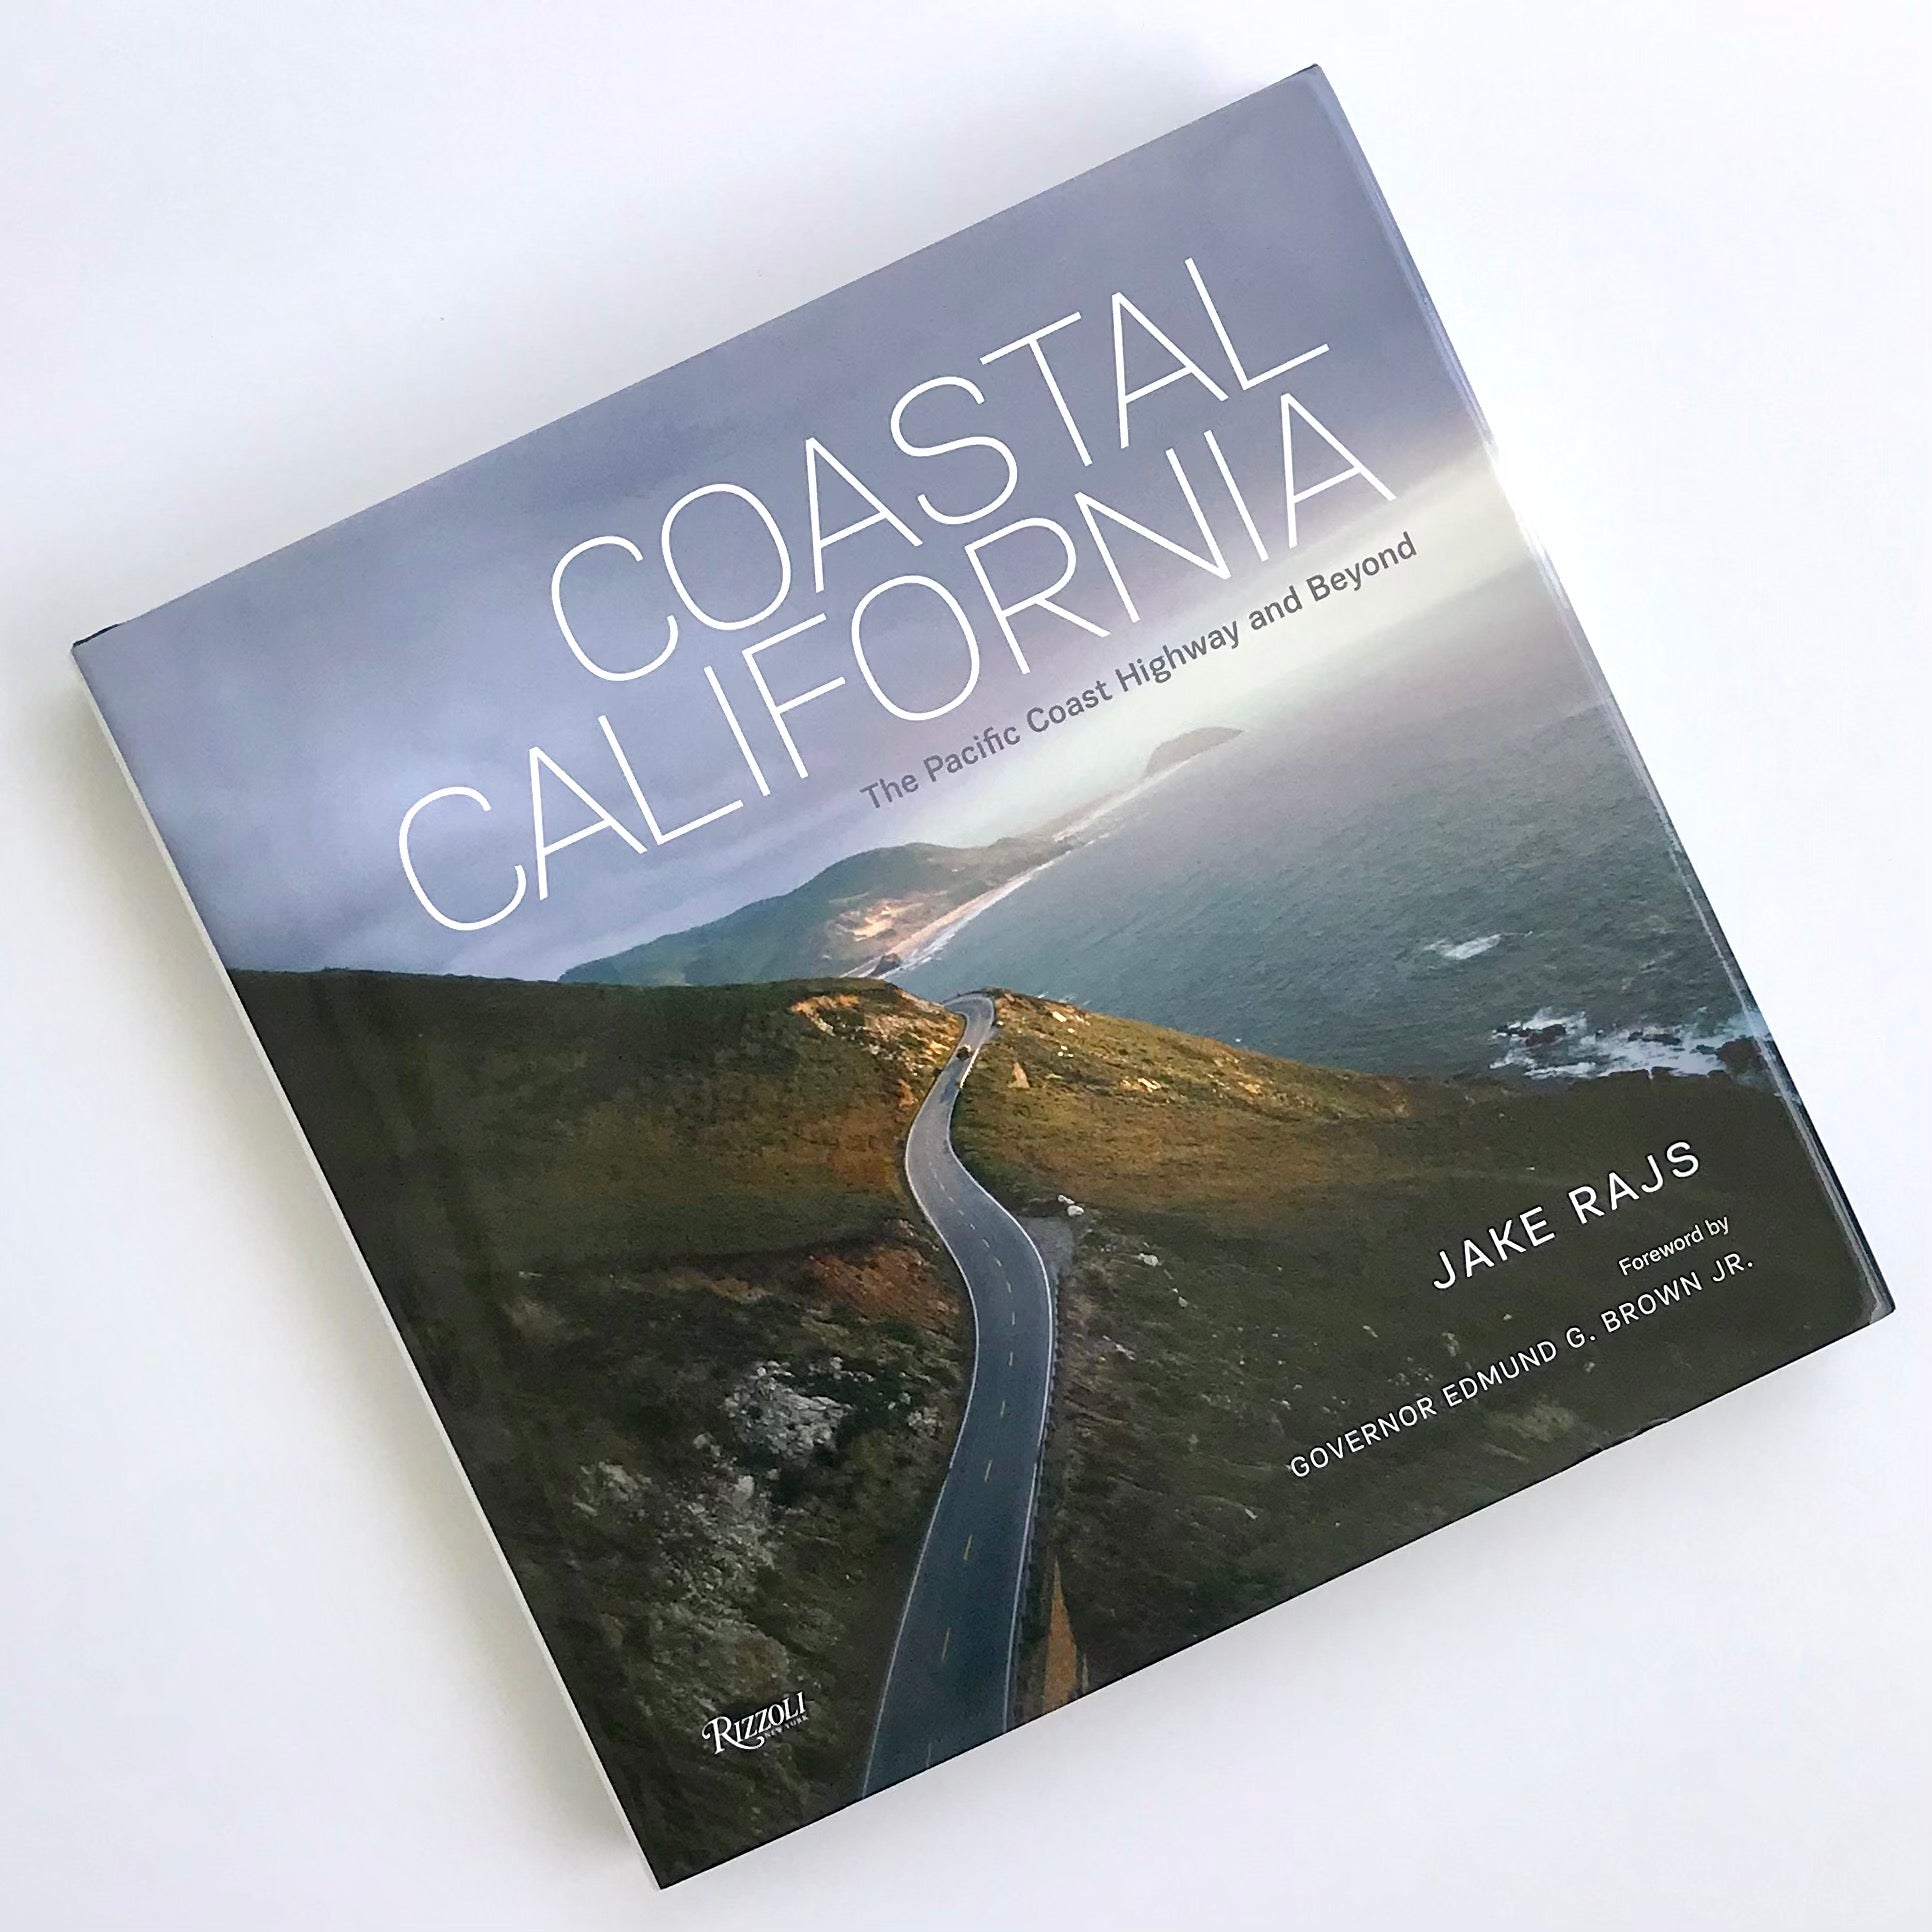 Book with image of Big Sur and Title: Coastal California